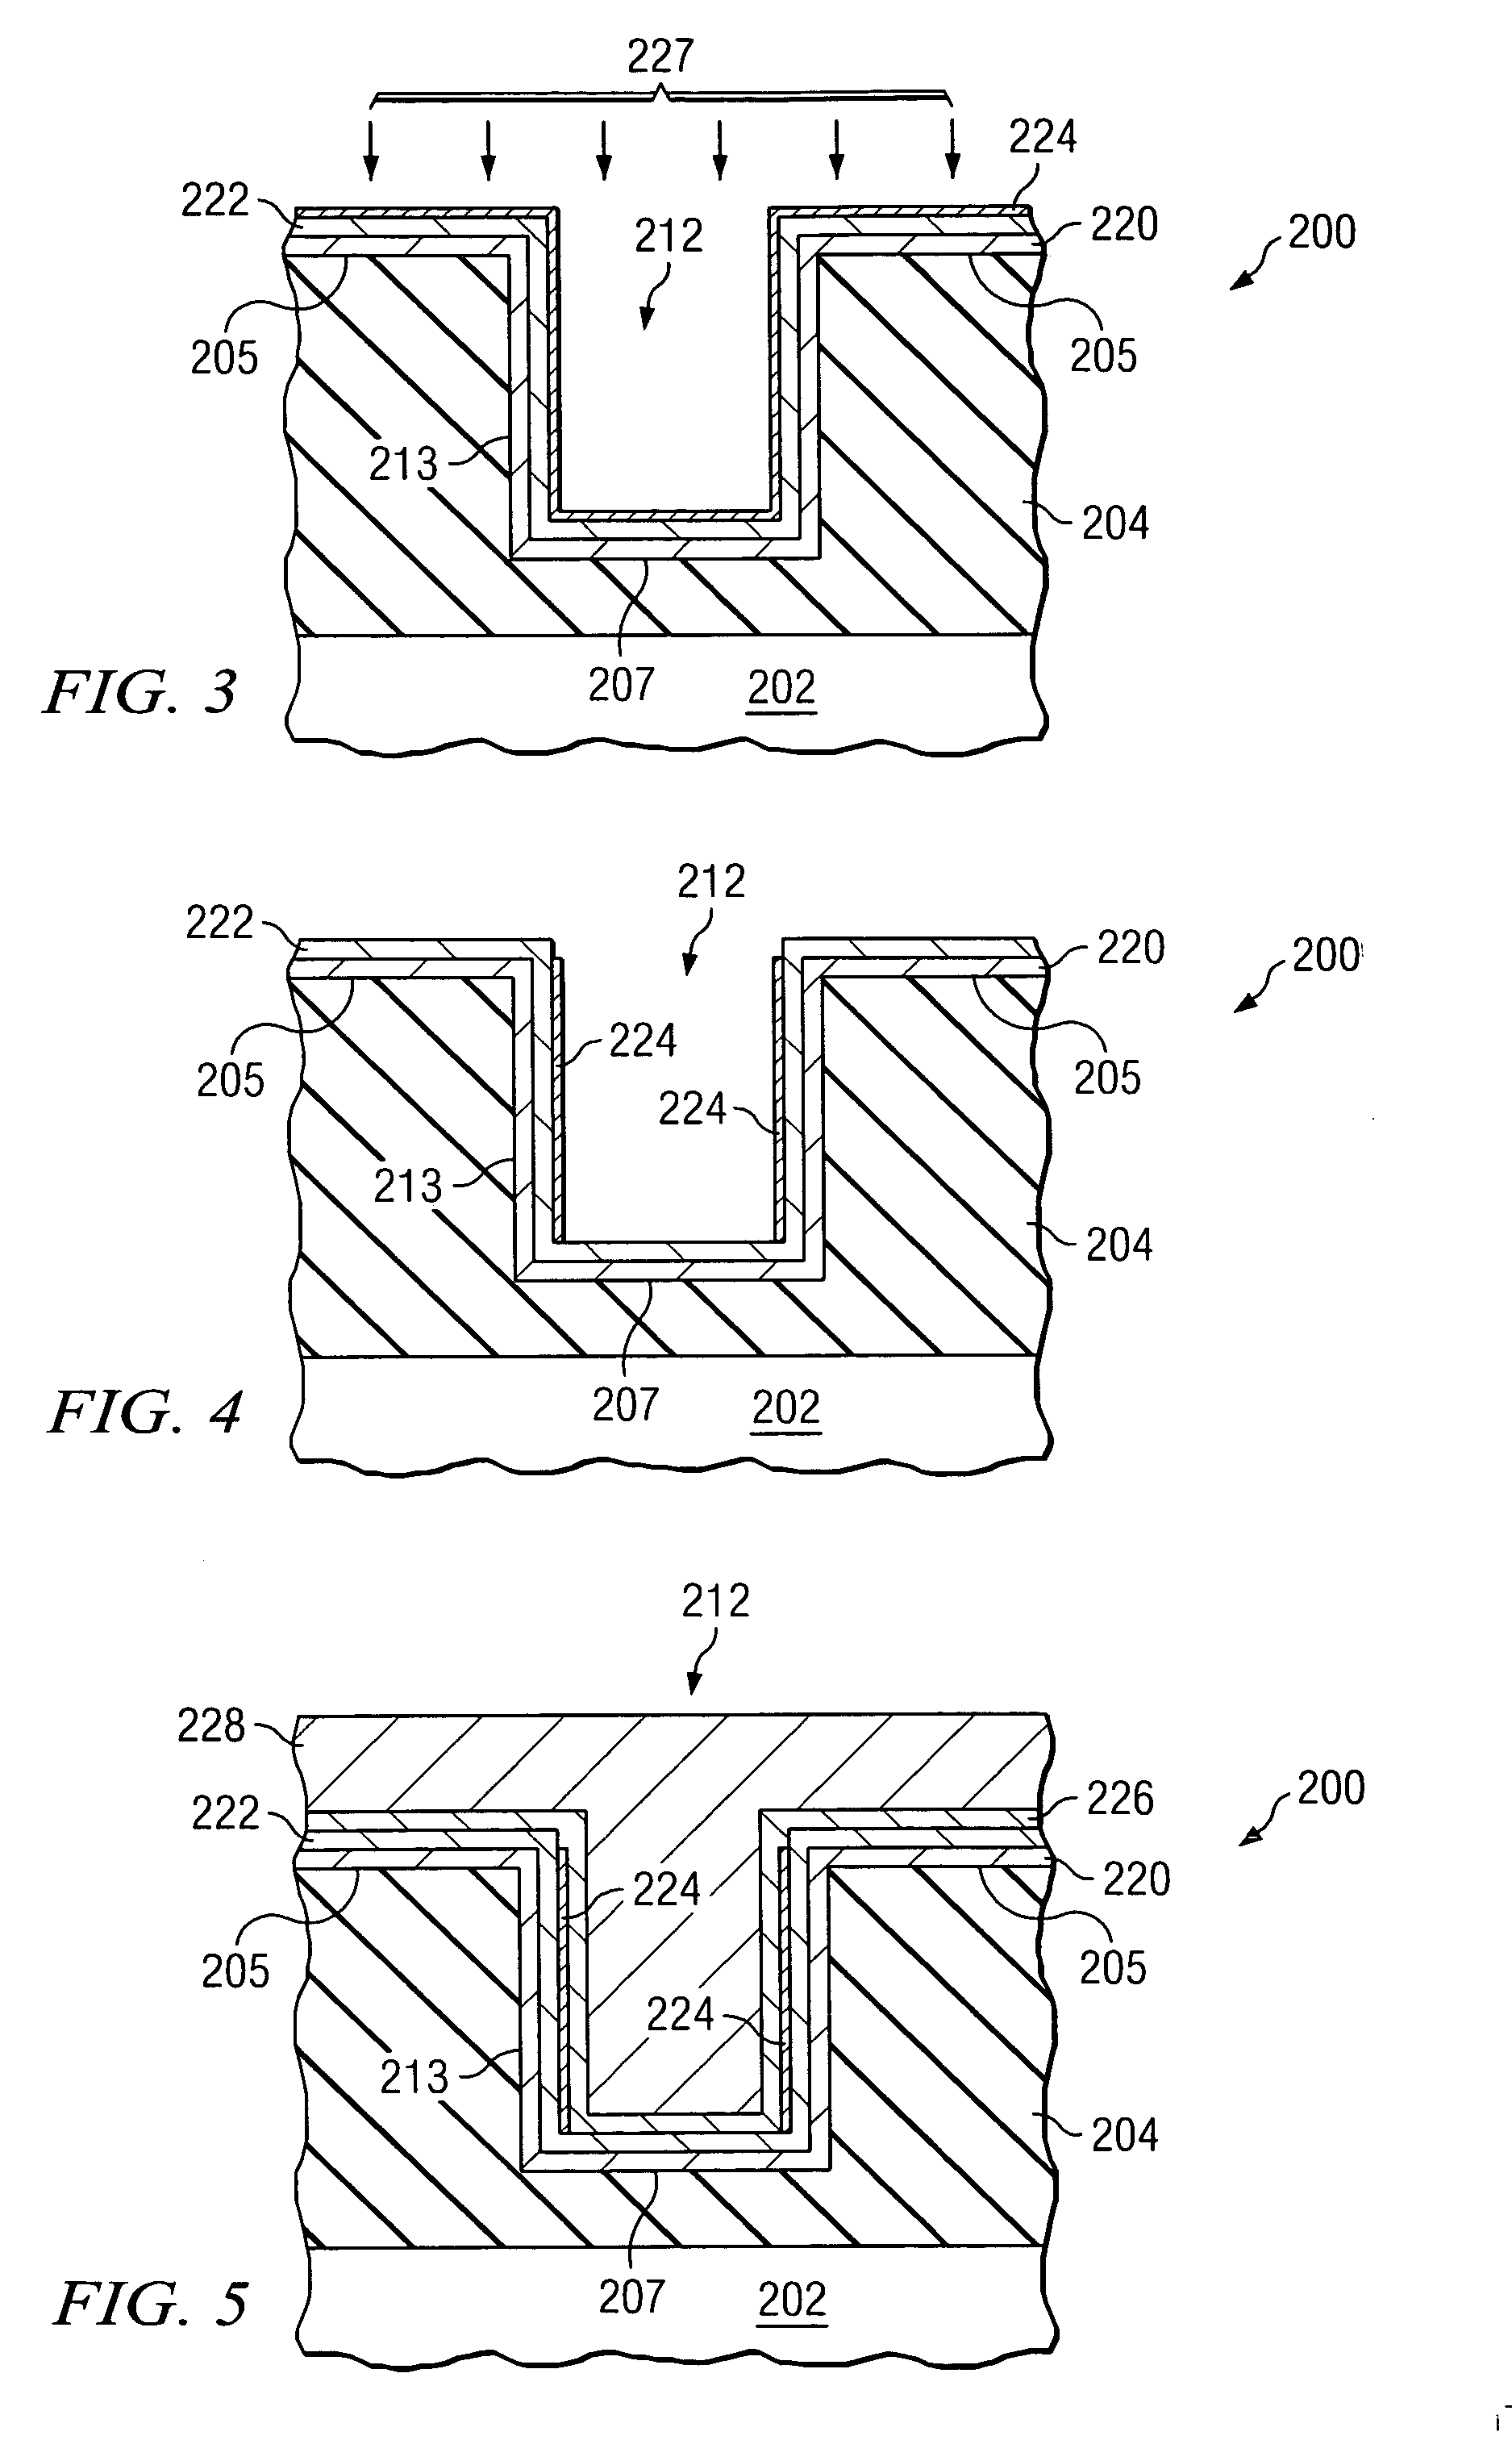 Barrier layers for conductive features